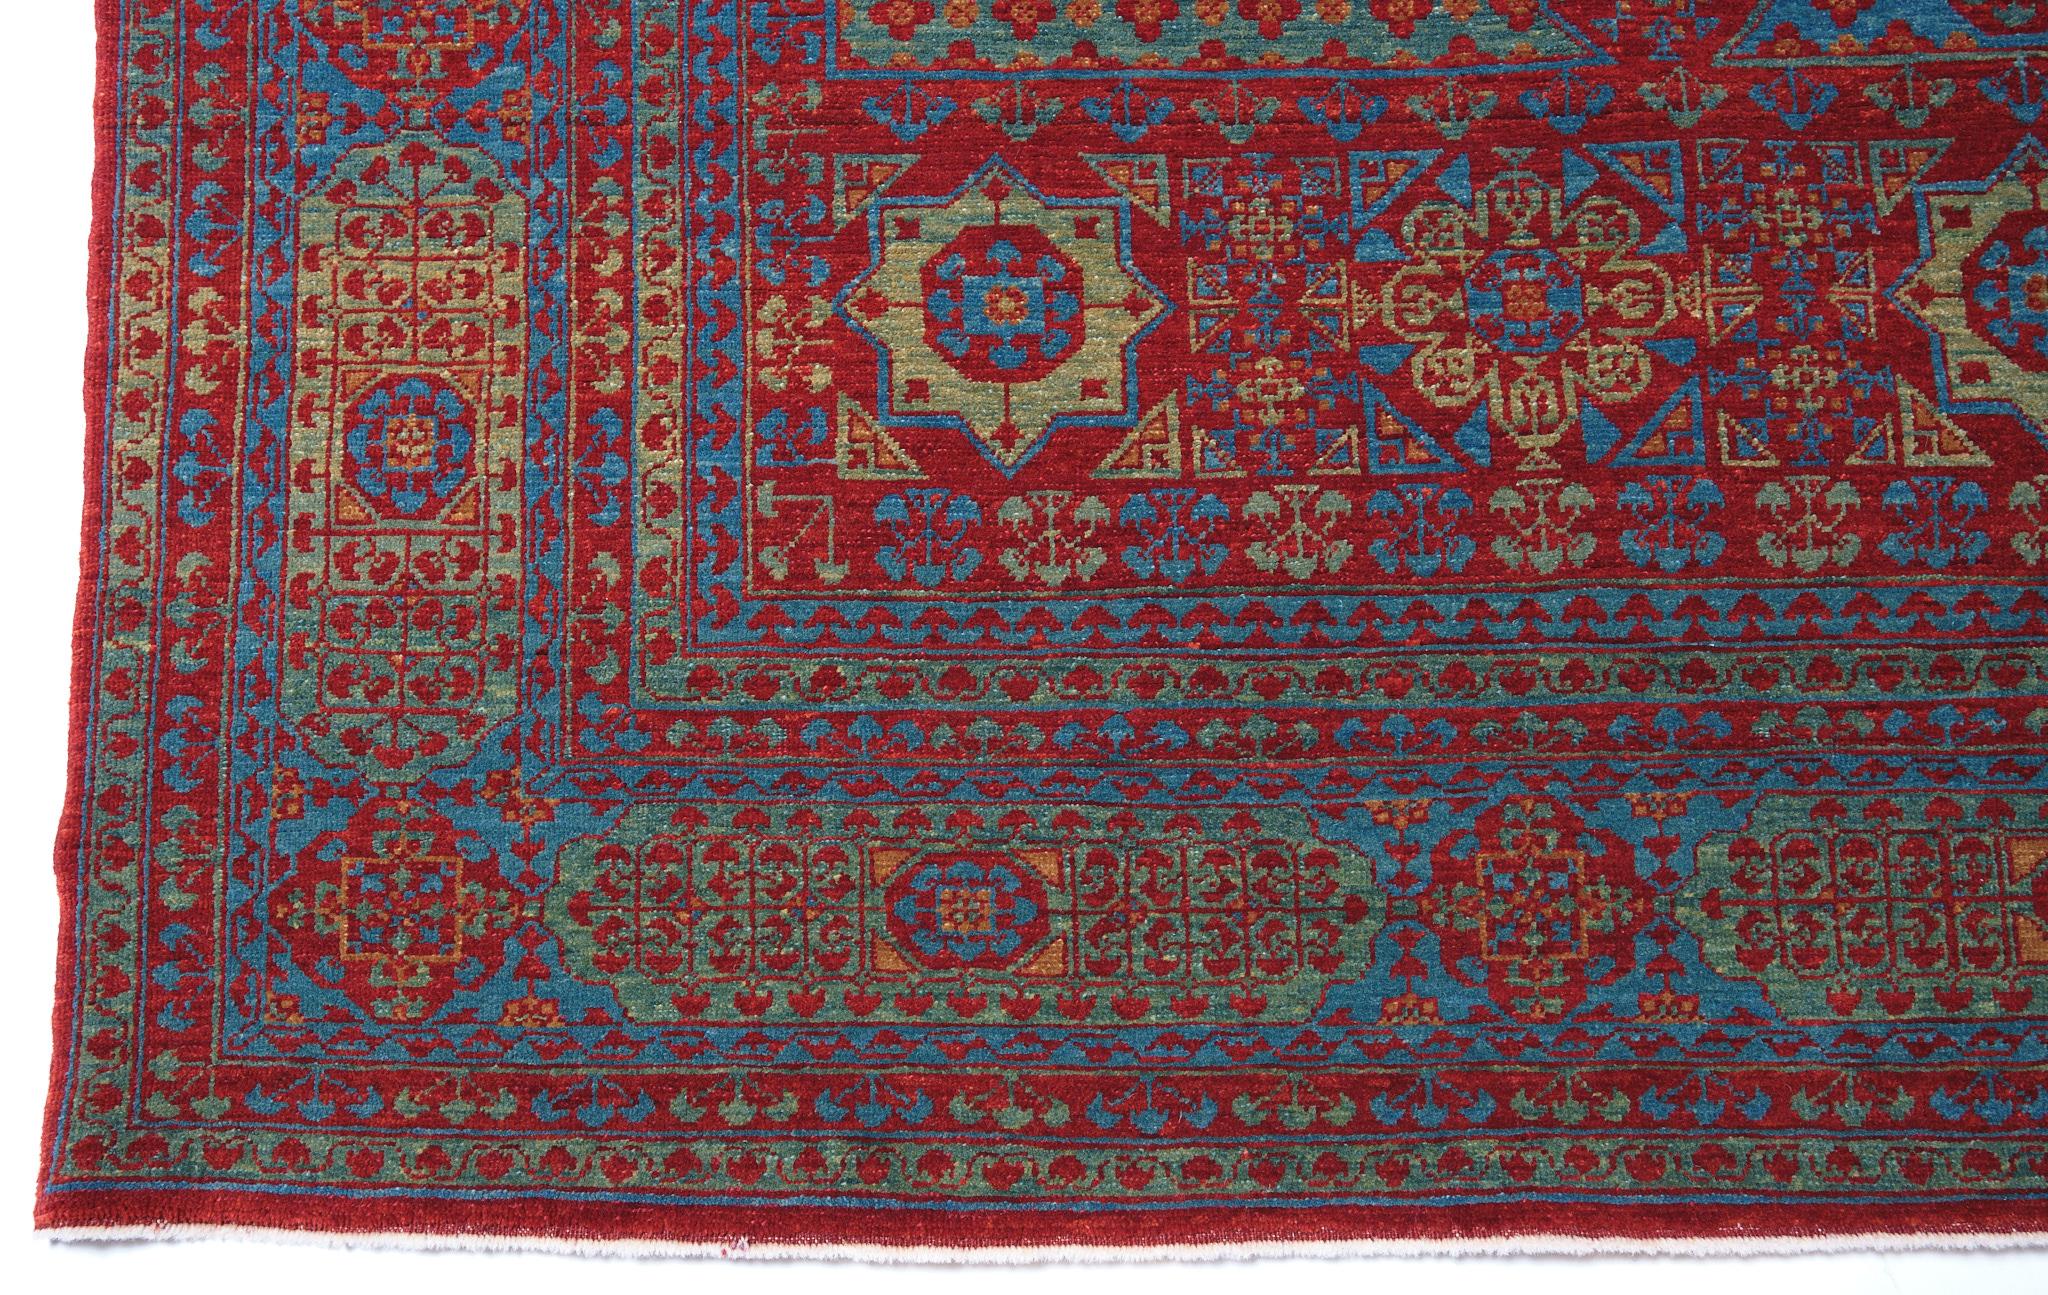 The source of the rug comes from the Textile Museum, Washington D.C. inv. R 16.2.4. This rug with the central star was designed in the early 16th-century rug by Mamluk Sultane of Cairo, Egypt. Acquired by Mr.Myers at the 1926 Benguiat Sale(“a